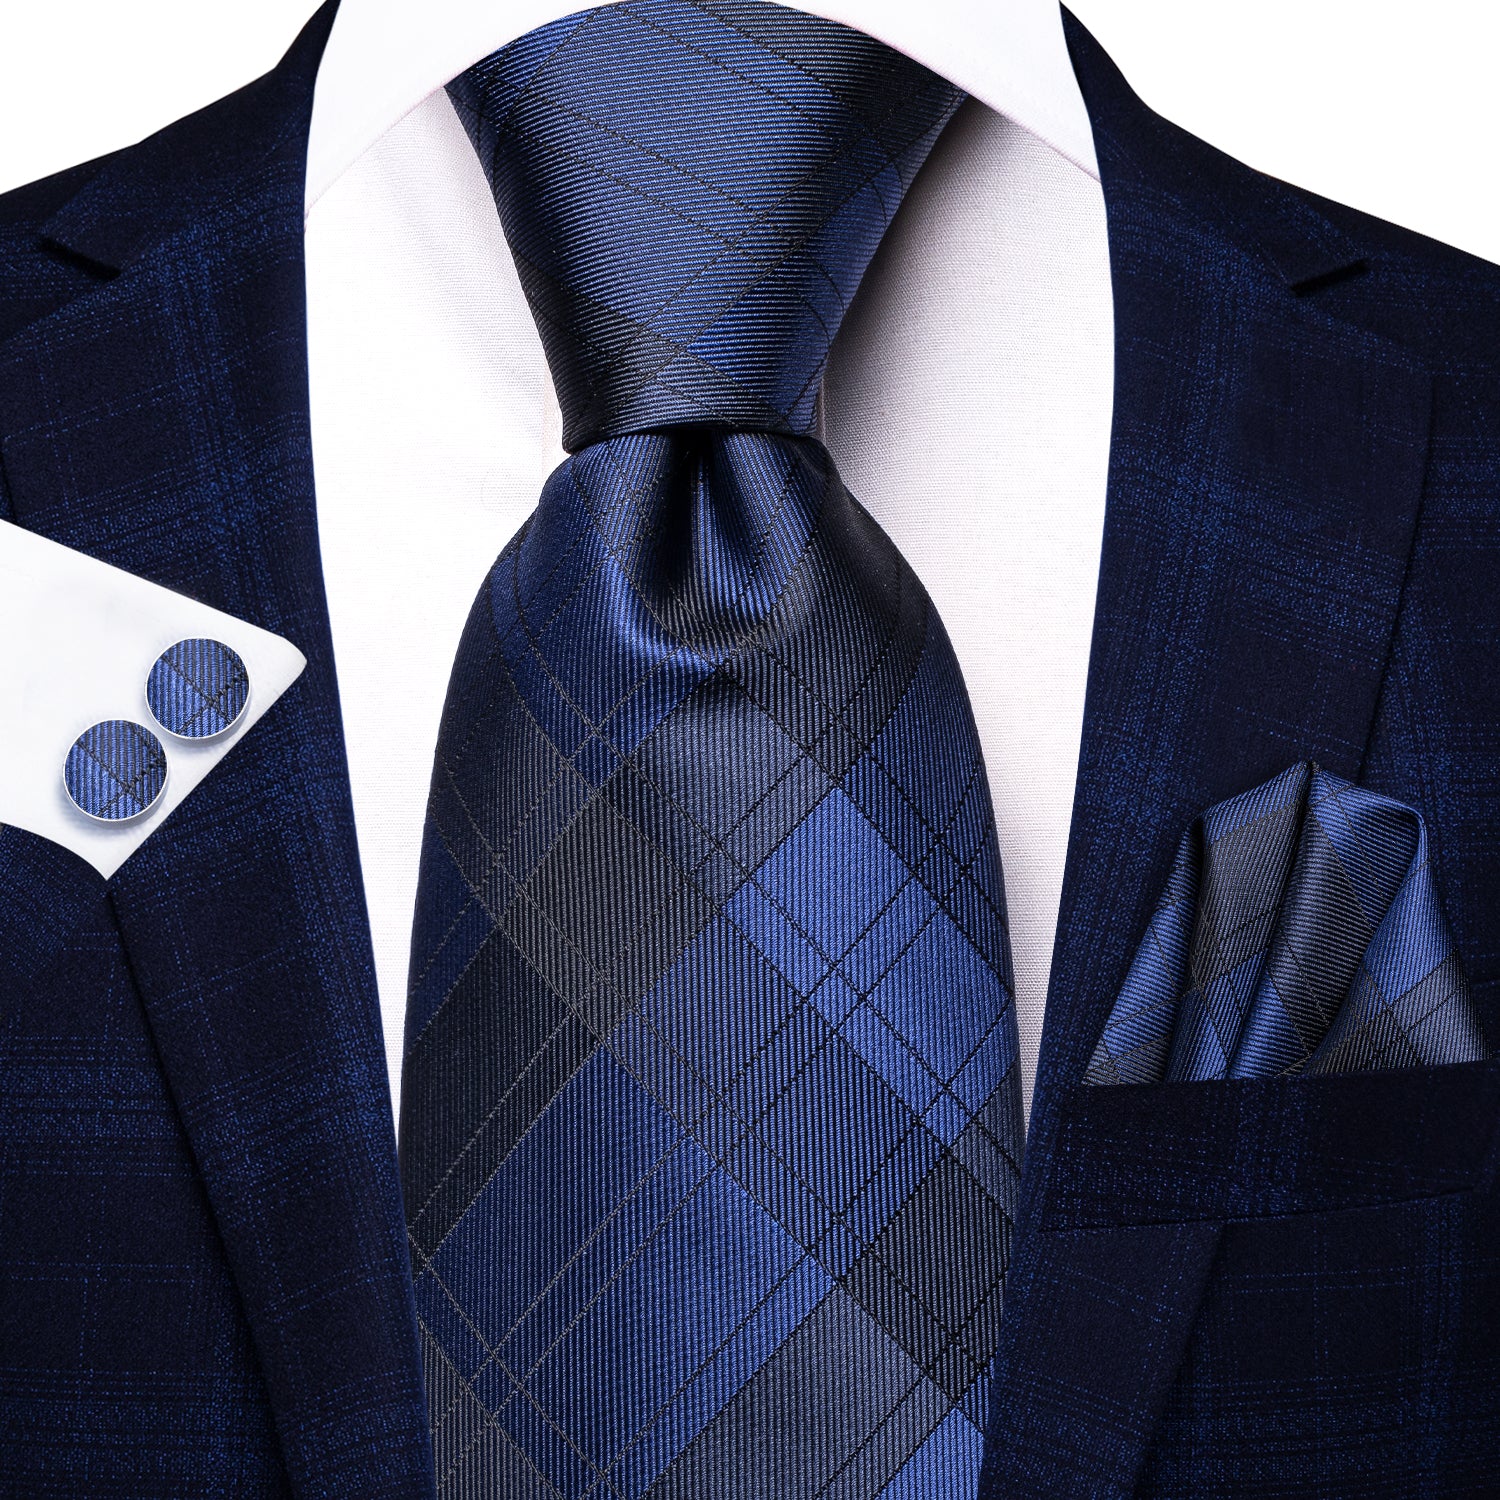 refined Blue Black Plaid Silk Tie, Pocket Square, and Cufflinks Set for a polished look